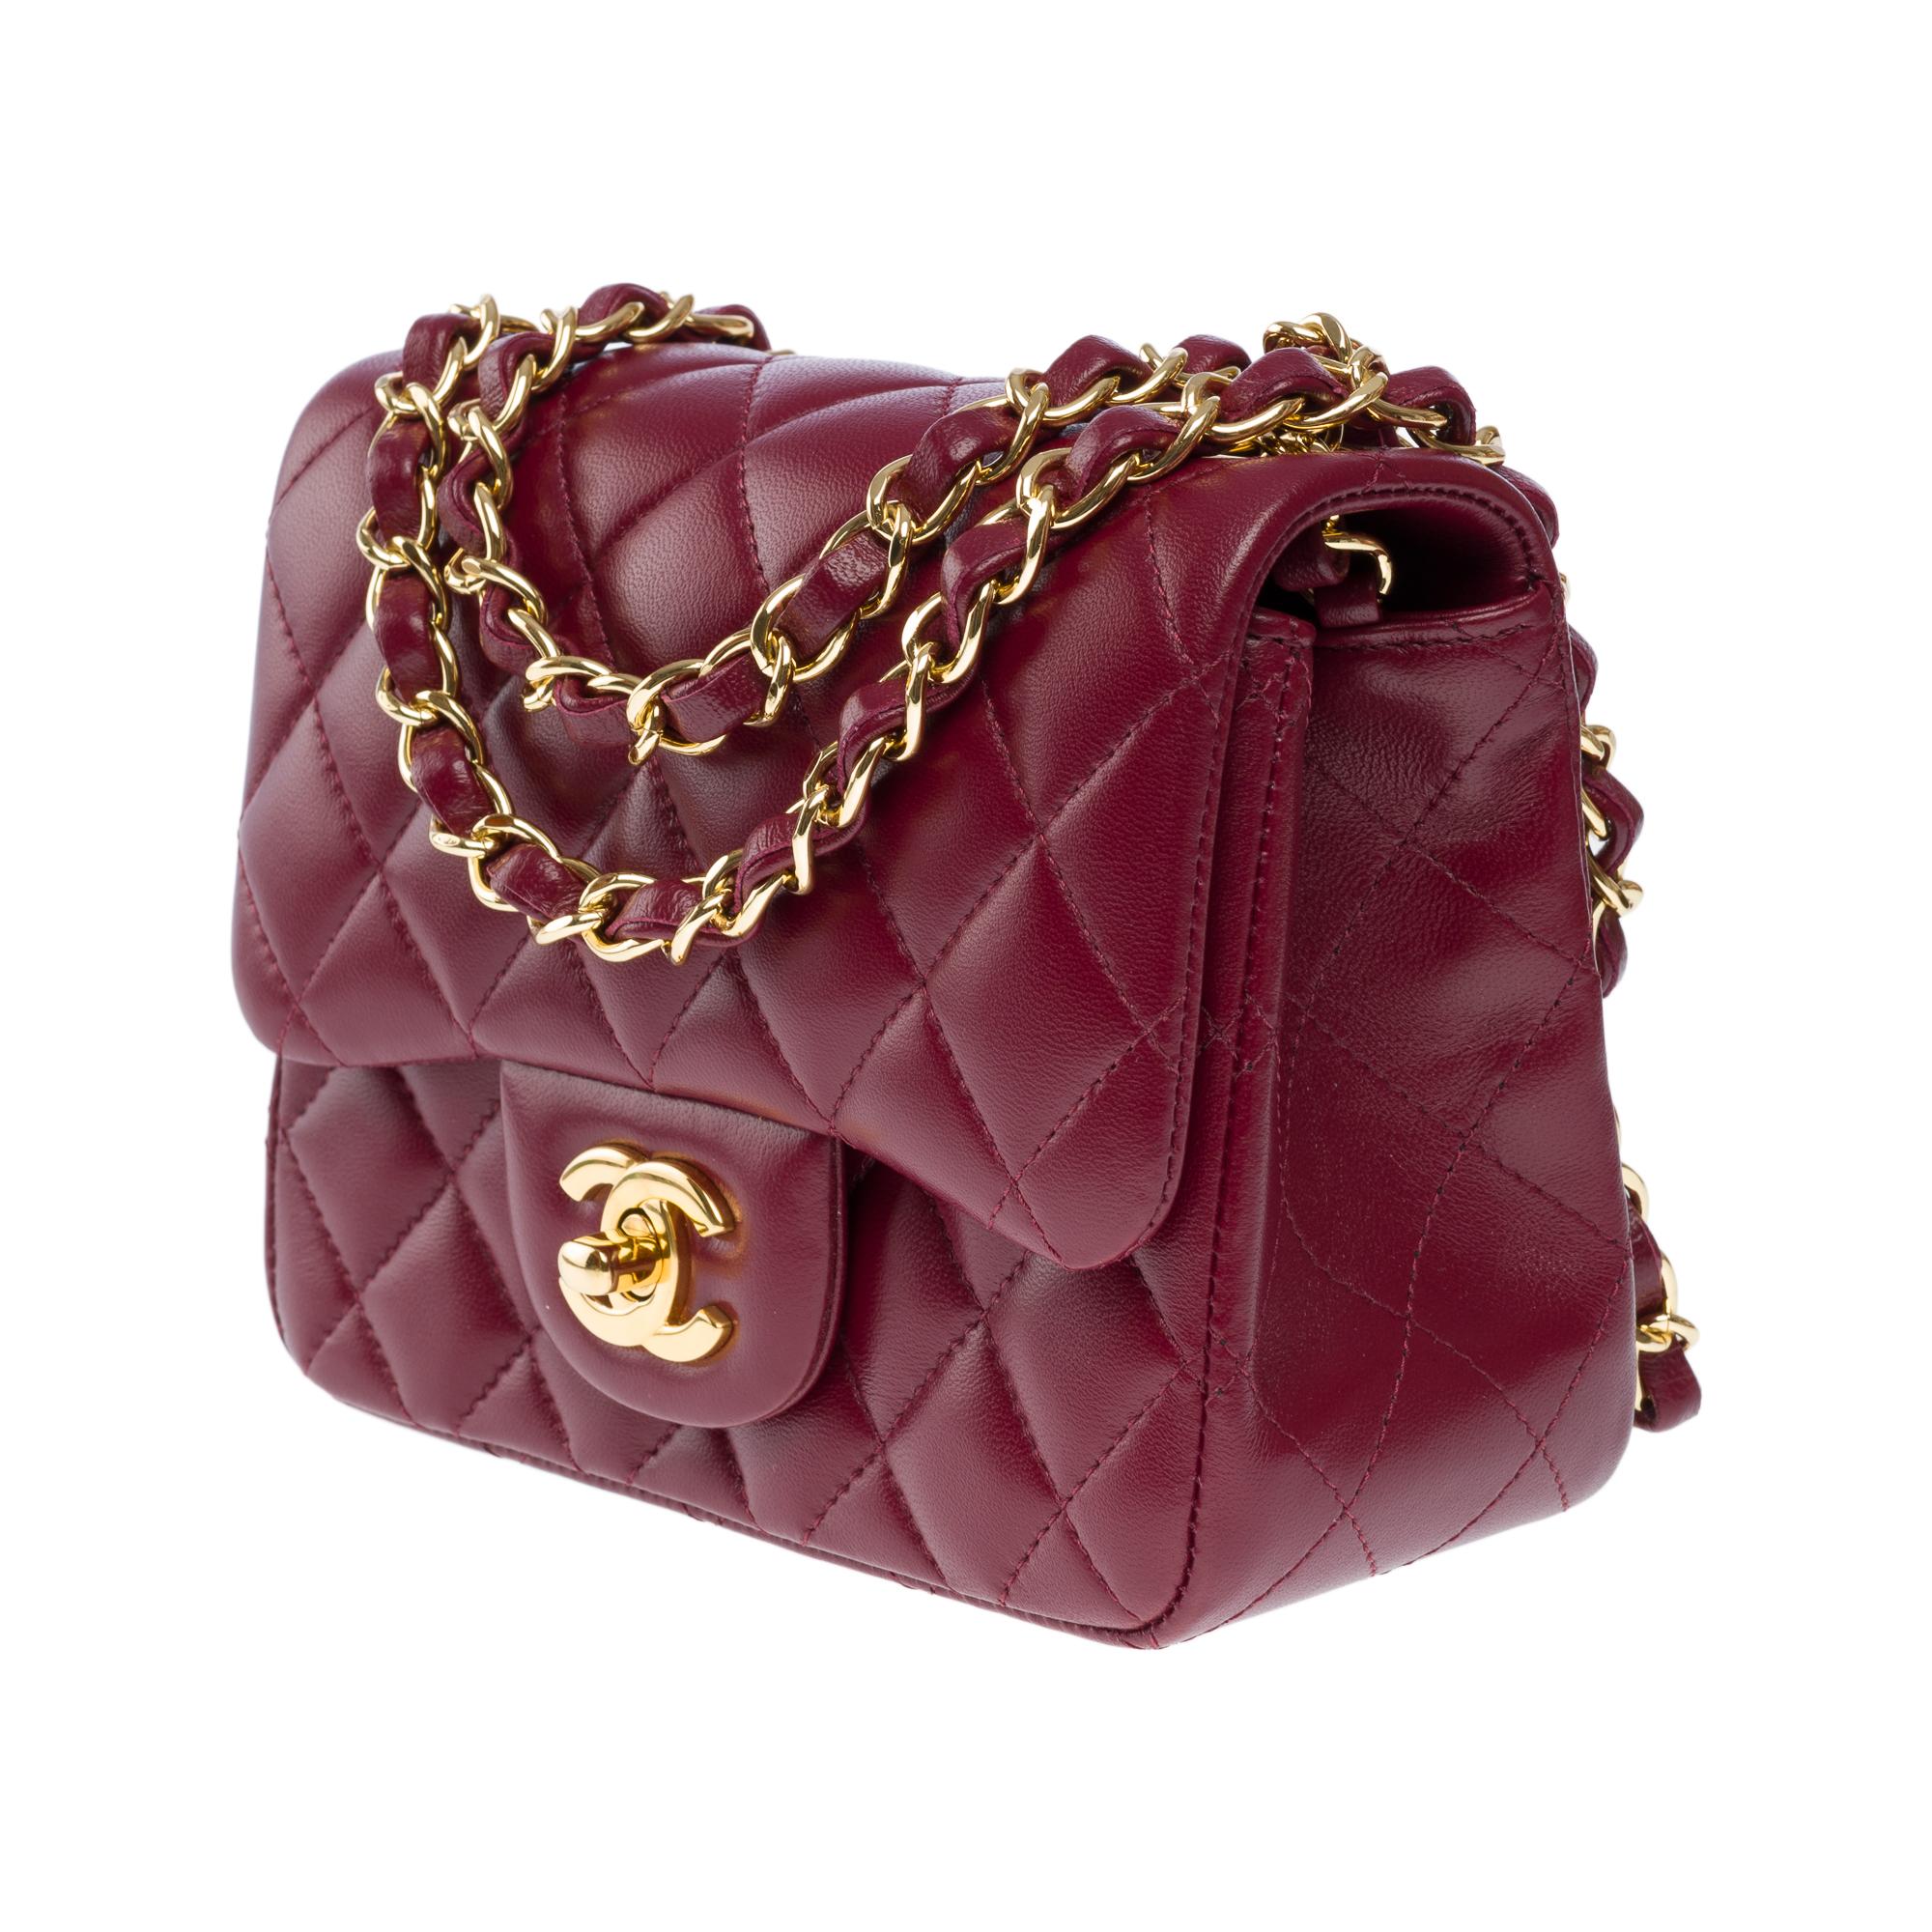 Gorgeous Chanel Mini Timeless Shoulder flap bag in Plum quilted leather, GHW For Sale 1